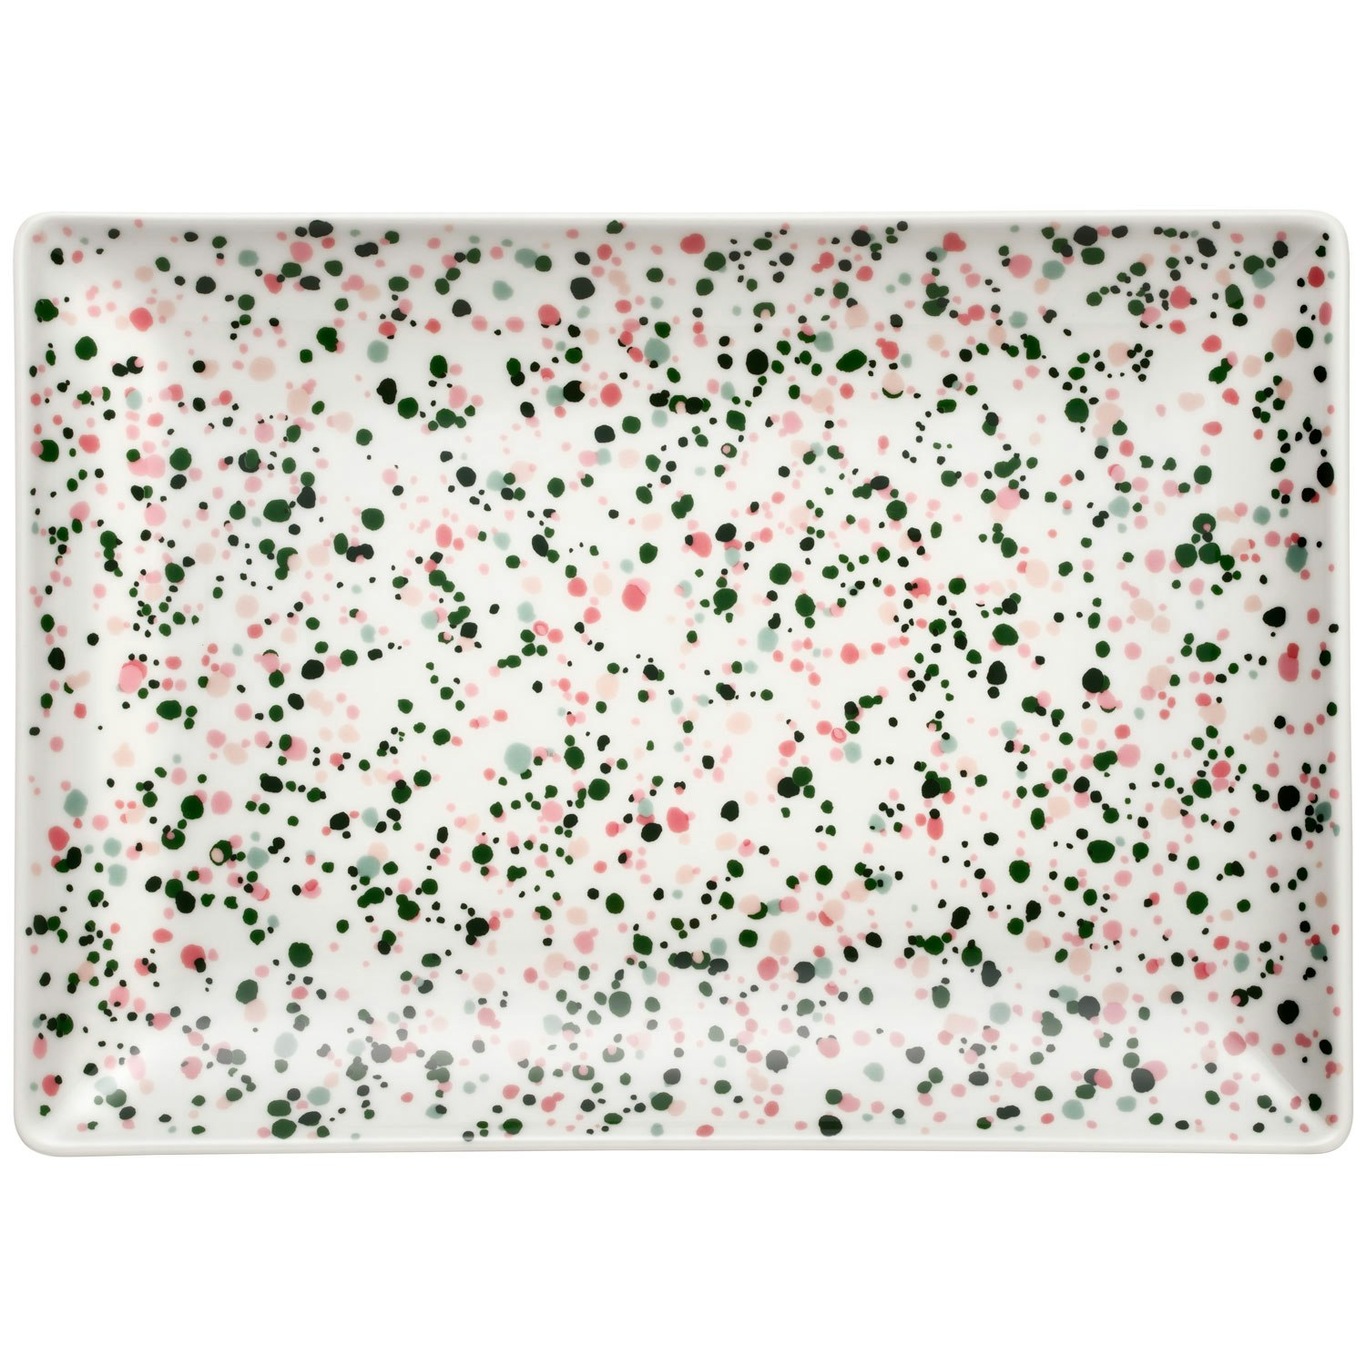 Oiva Toikka Collection Helle Plate Pink / Green, A4 21x29 cm